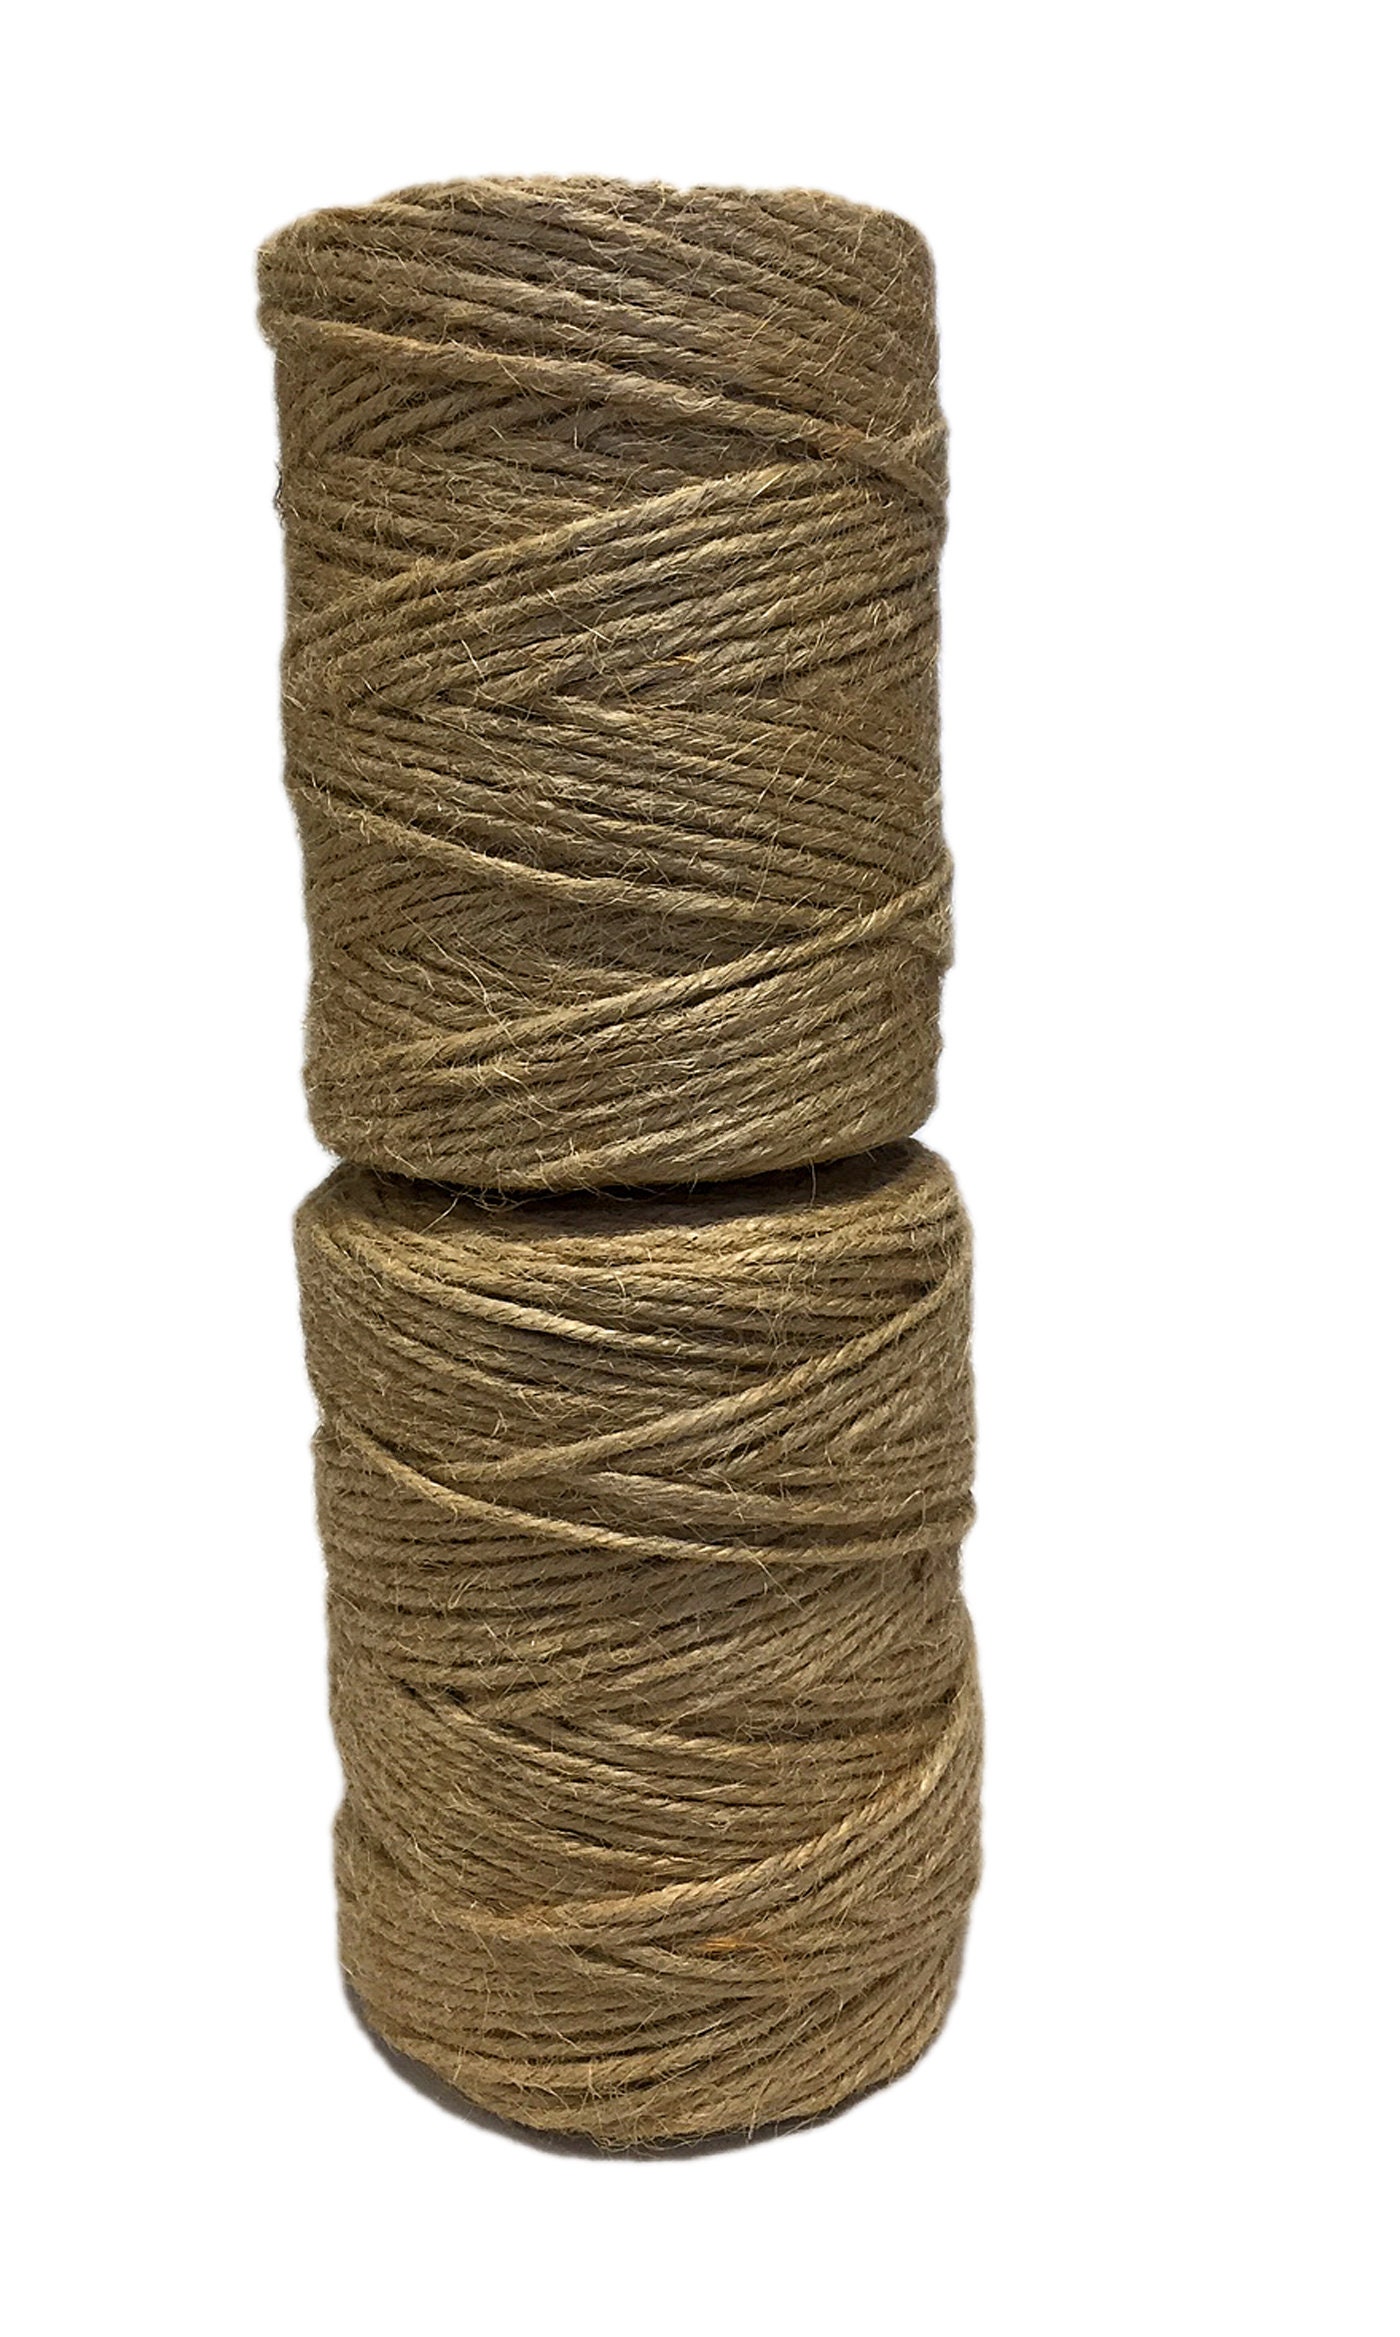 Wrapping Twine Gift Wrap Twine Jute Rope Gift Wrapping Packing Twine Decorative  Rope Cord Bakers Cord Linnen Rope 